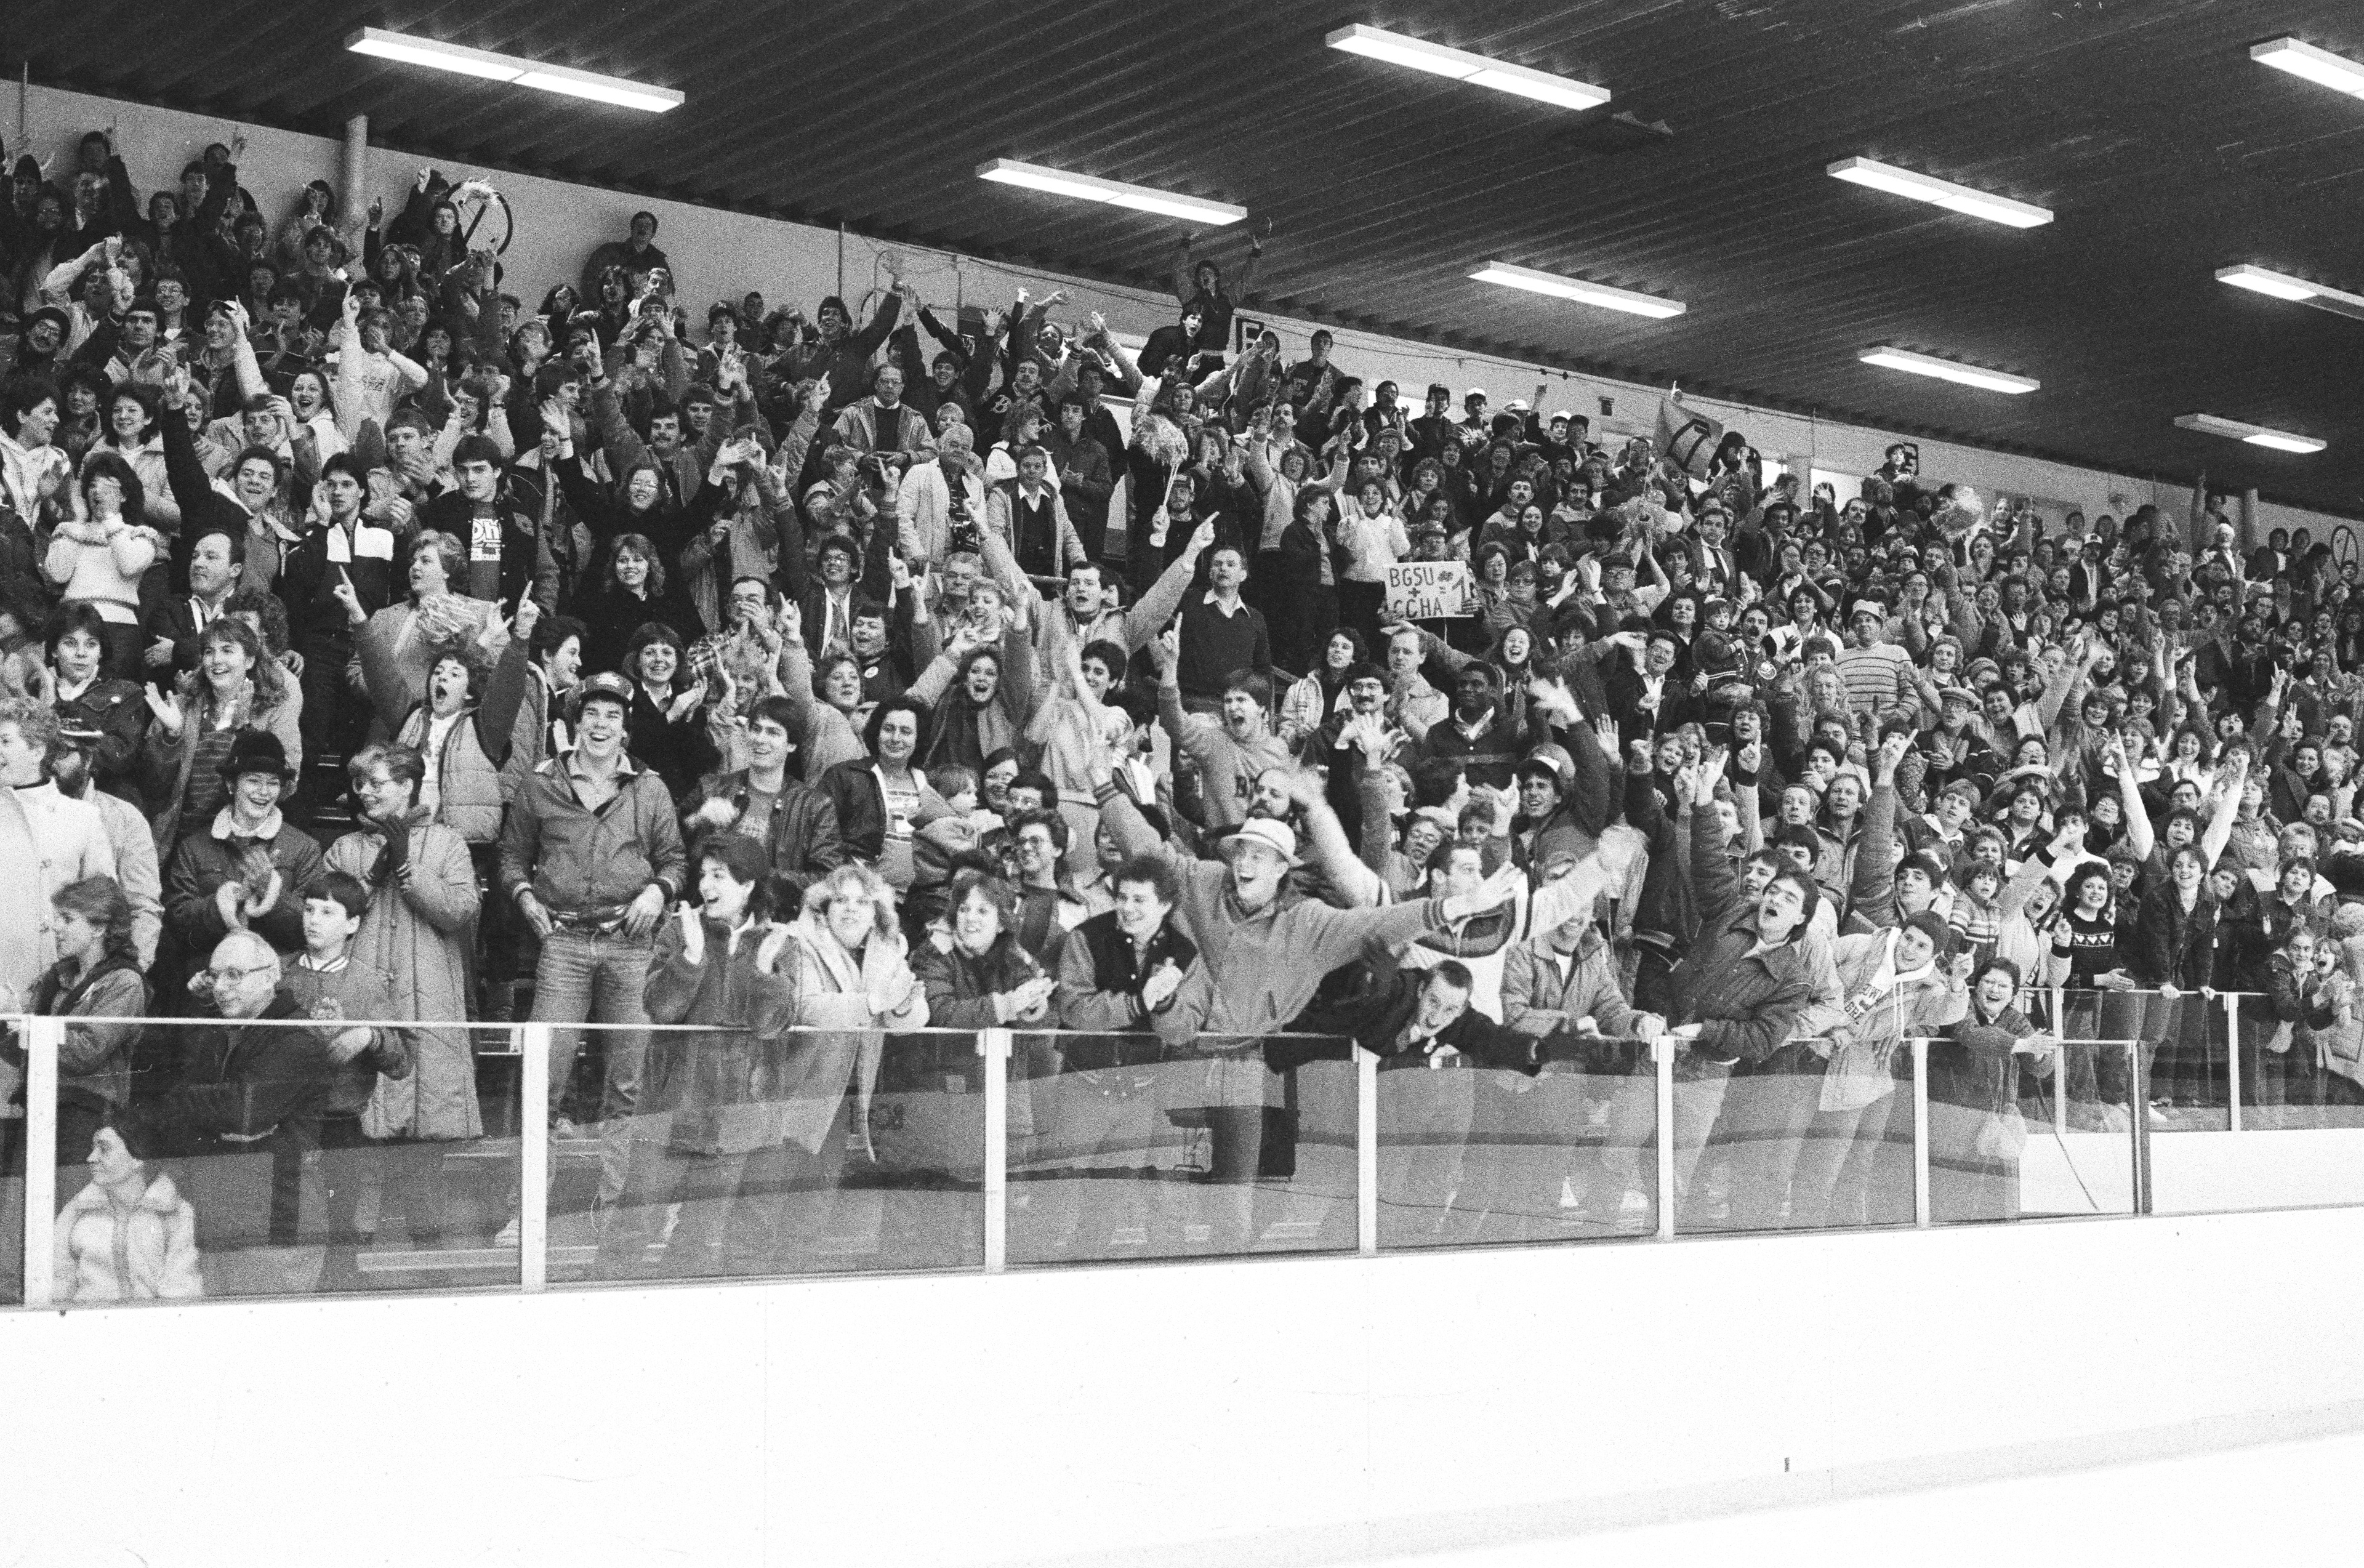 Fans celebrate in a raucous atmosphere at what is now known as the Slater Family Ice Arena. 